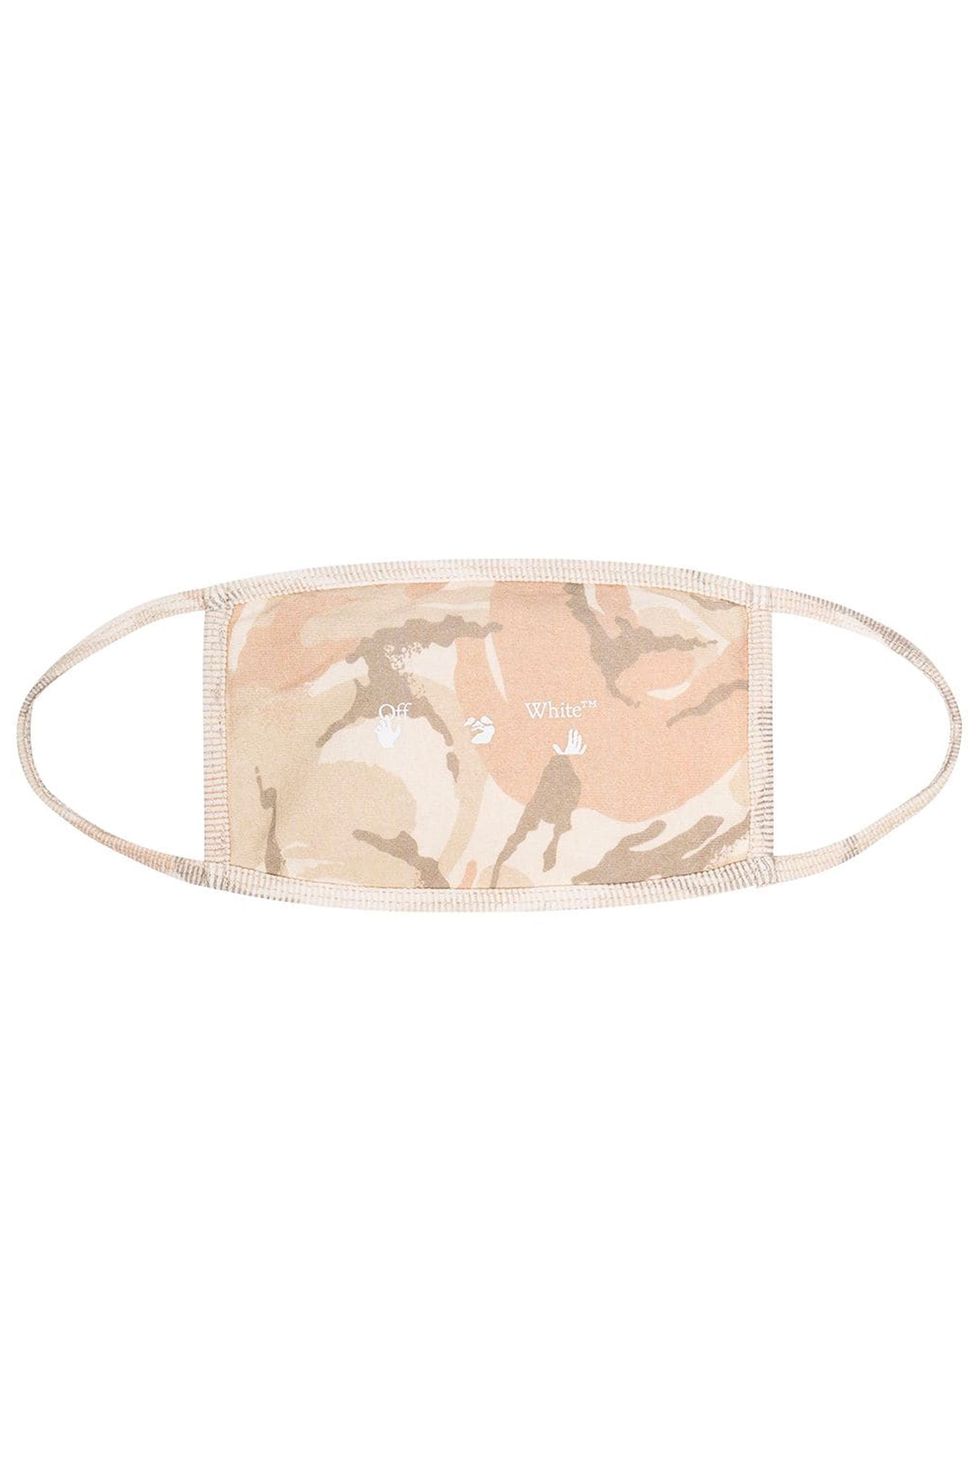 Off-White x Browns 50 camouflage face mask